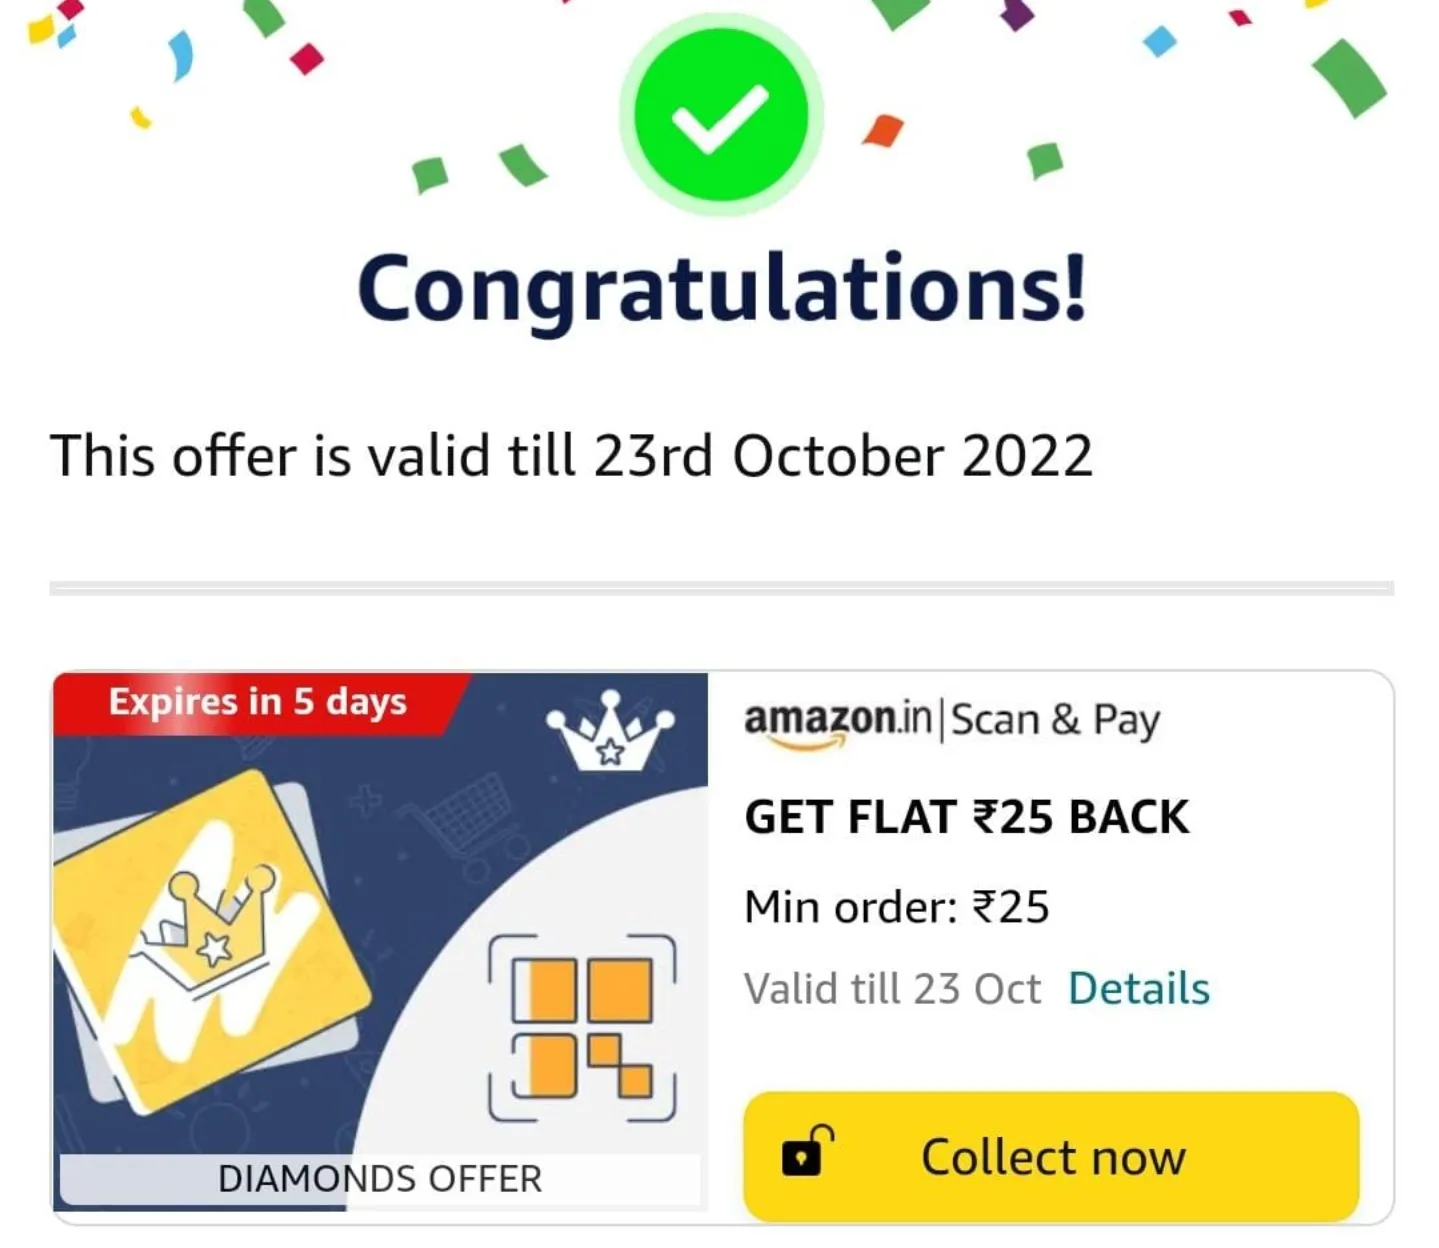 Amazon spend 50 diamonds get 25 on 25 scan and pay